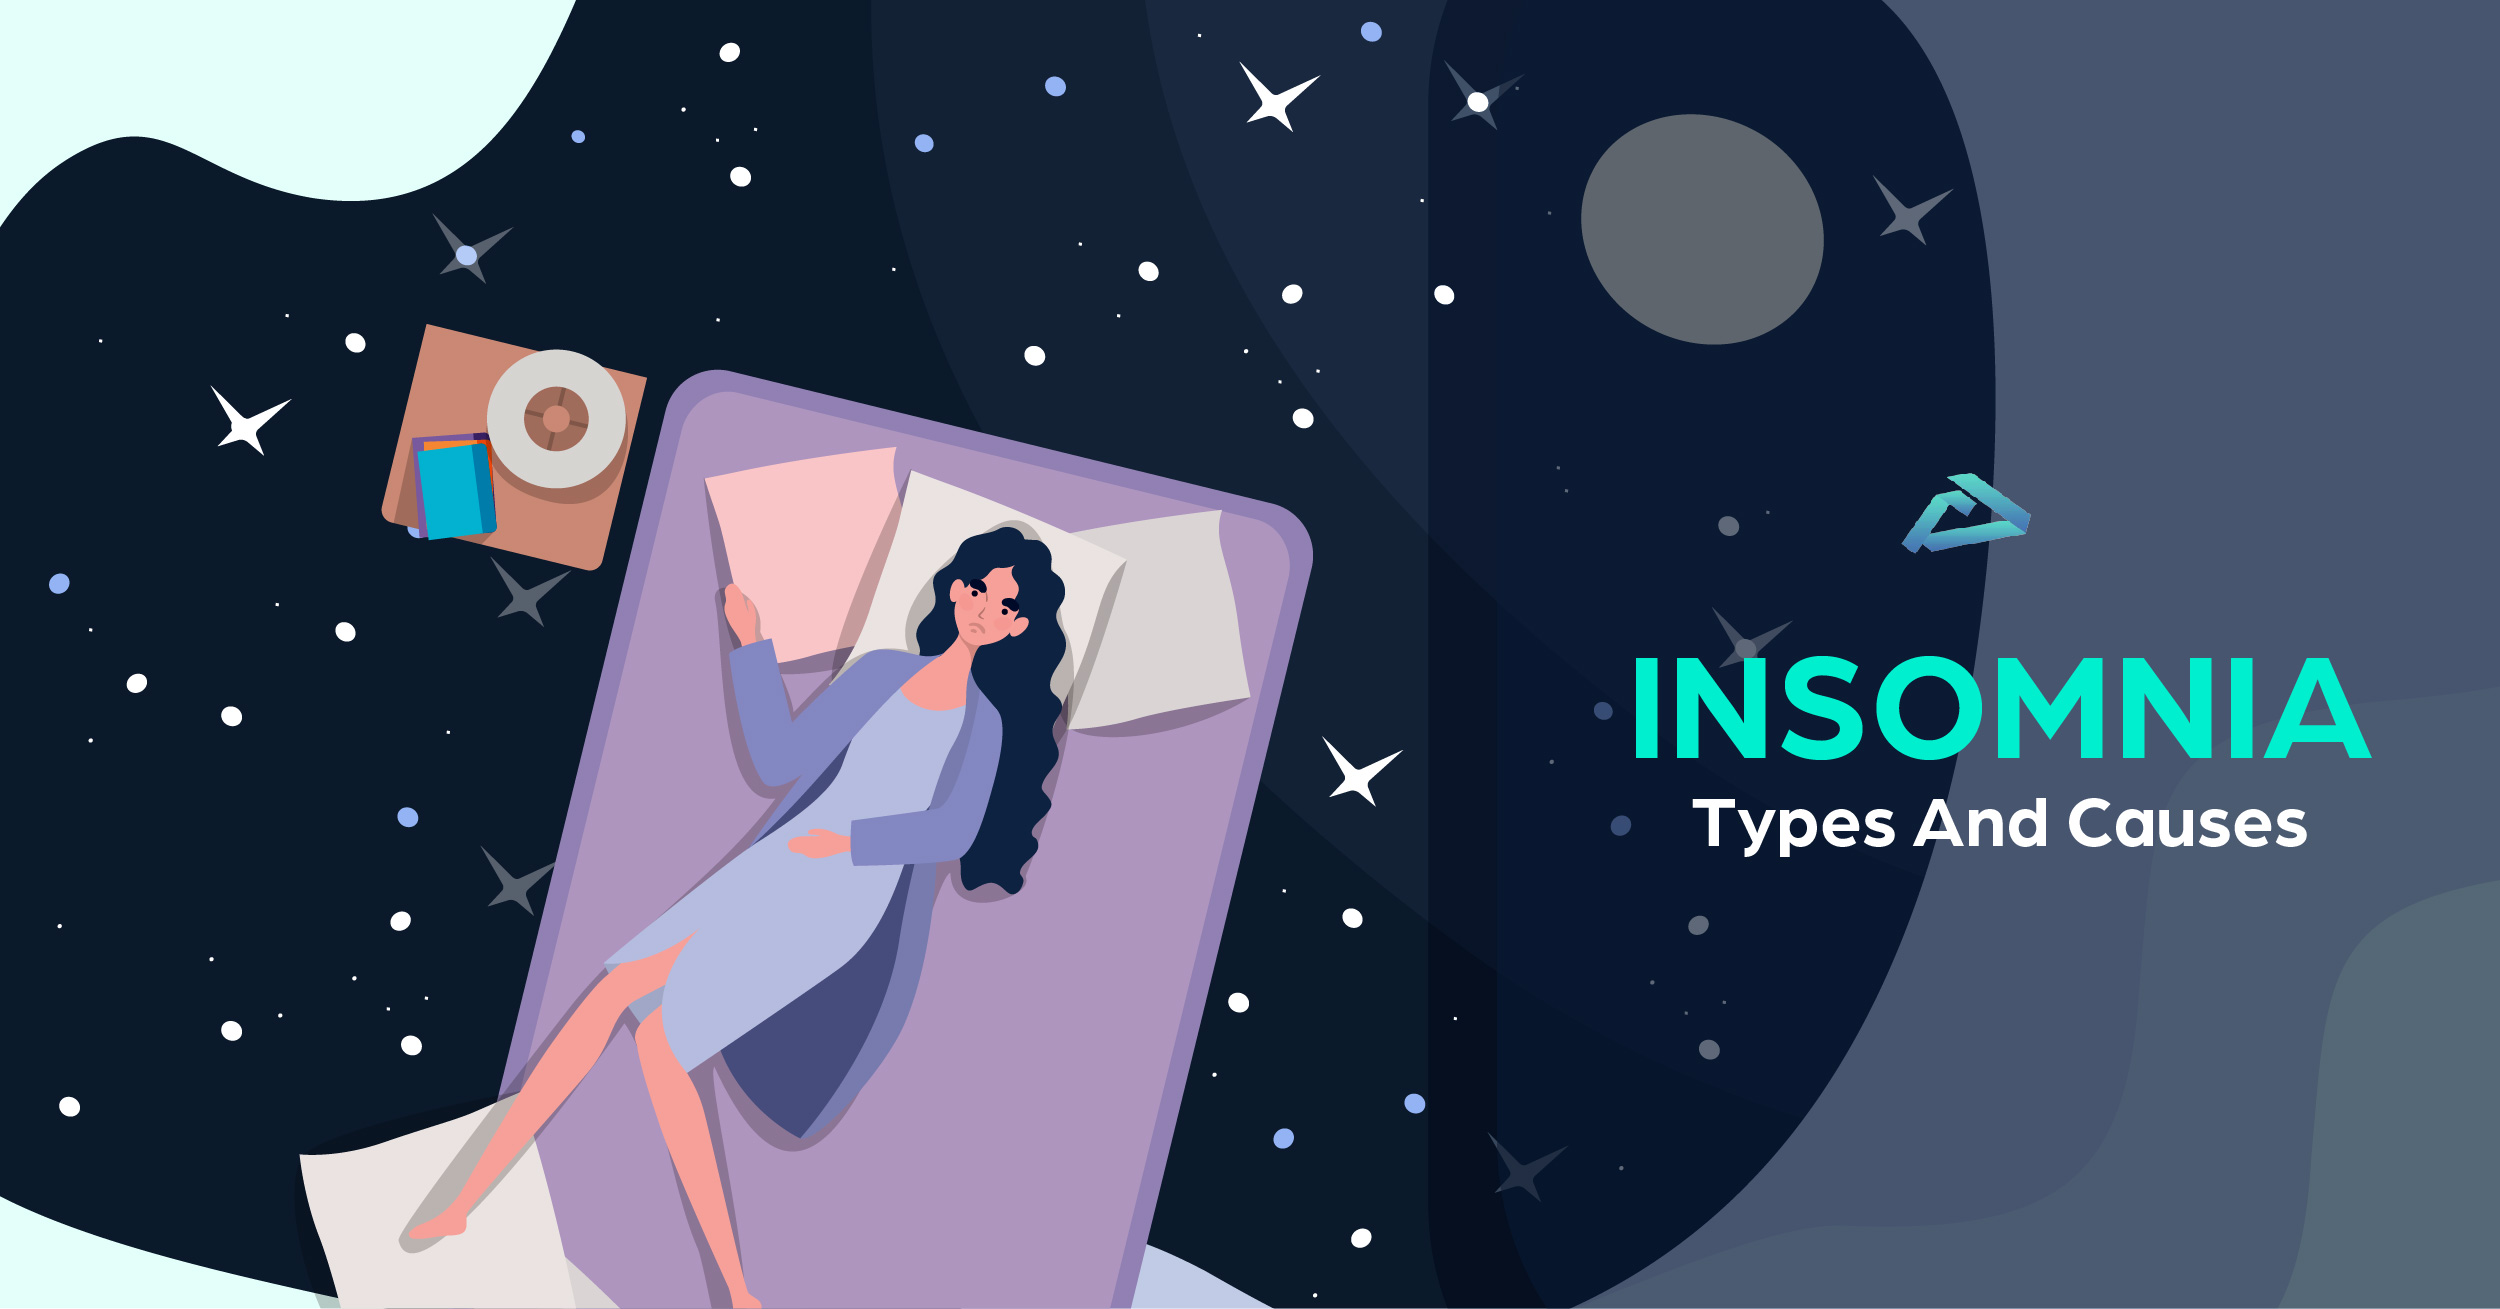 4 types of insomnia